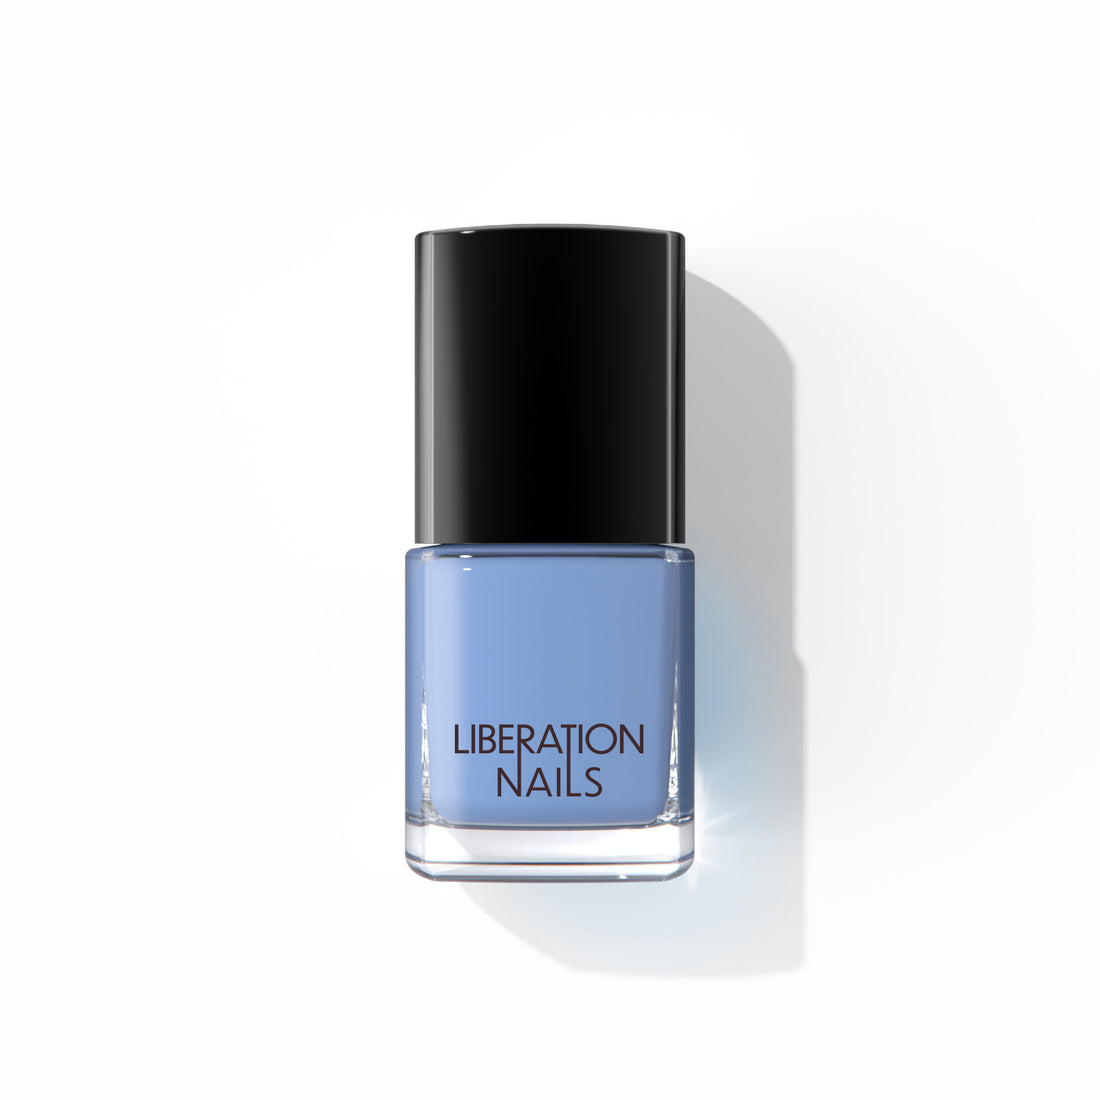 A bottle of Liberation Nails nail polish in a light blue color, Surrender.